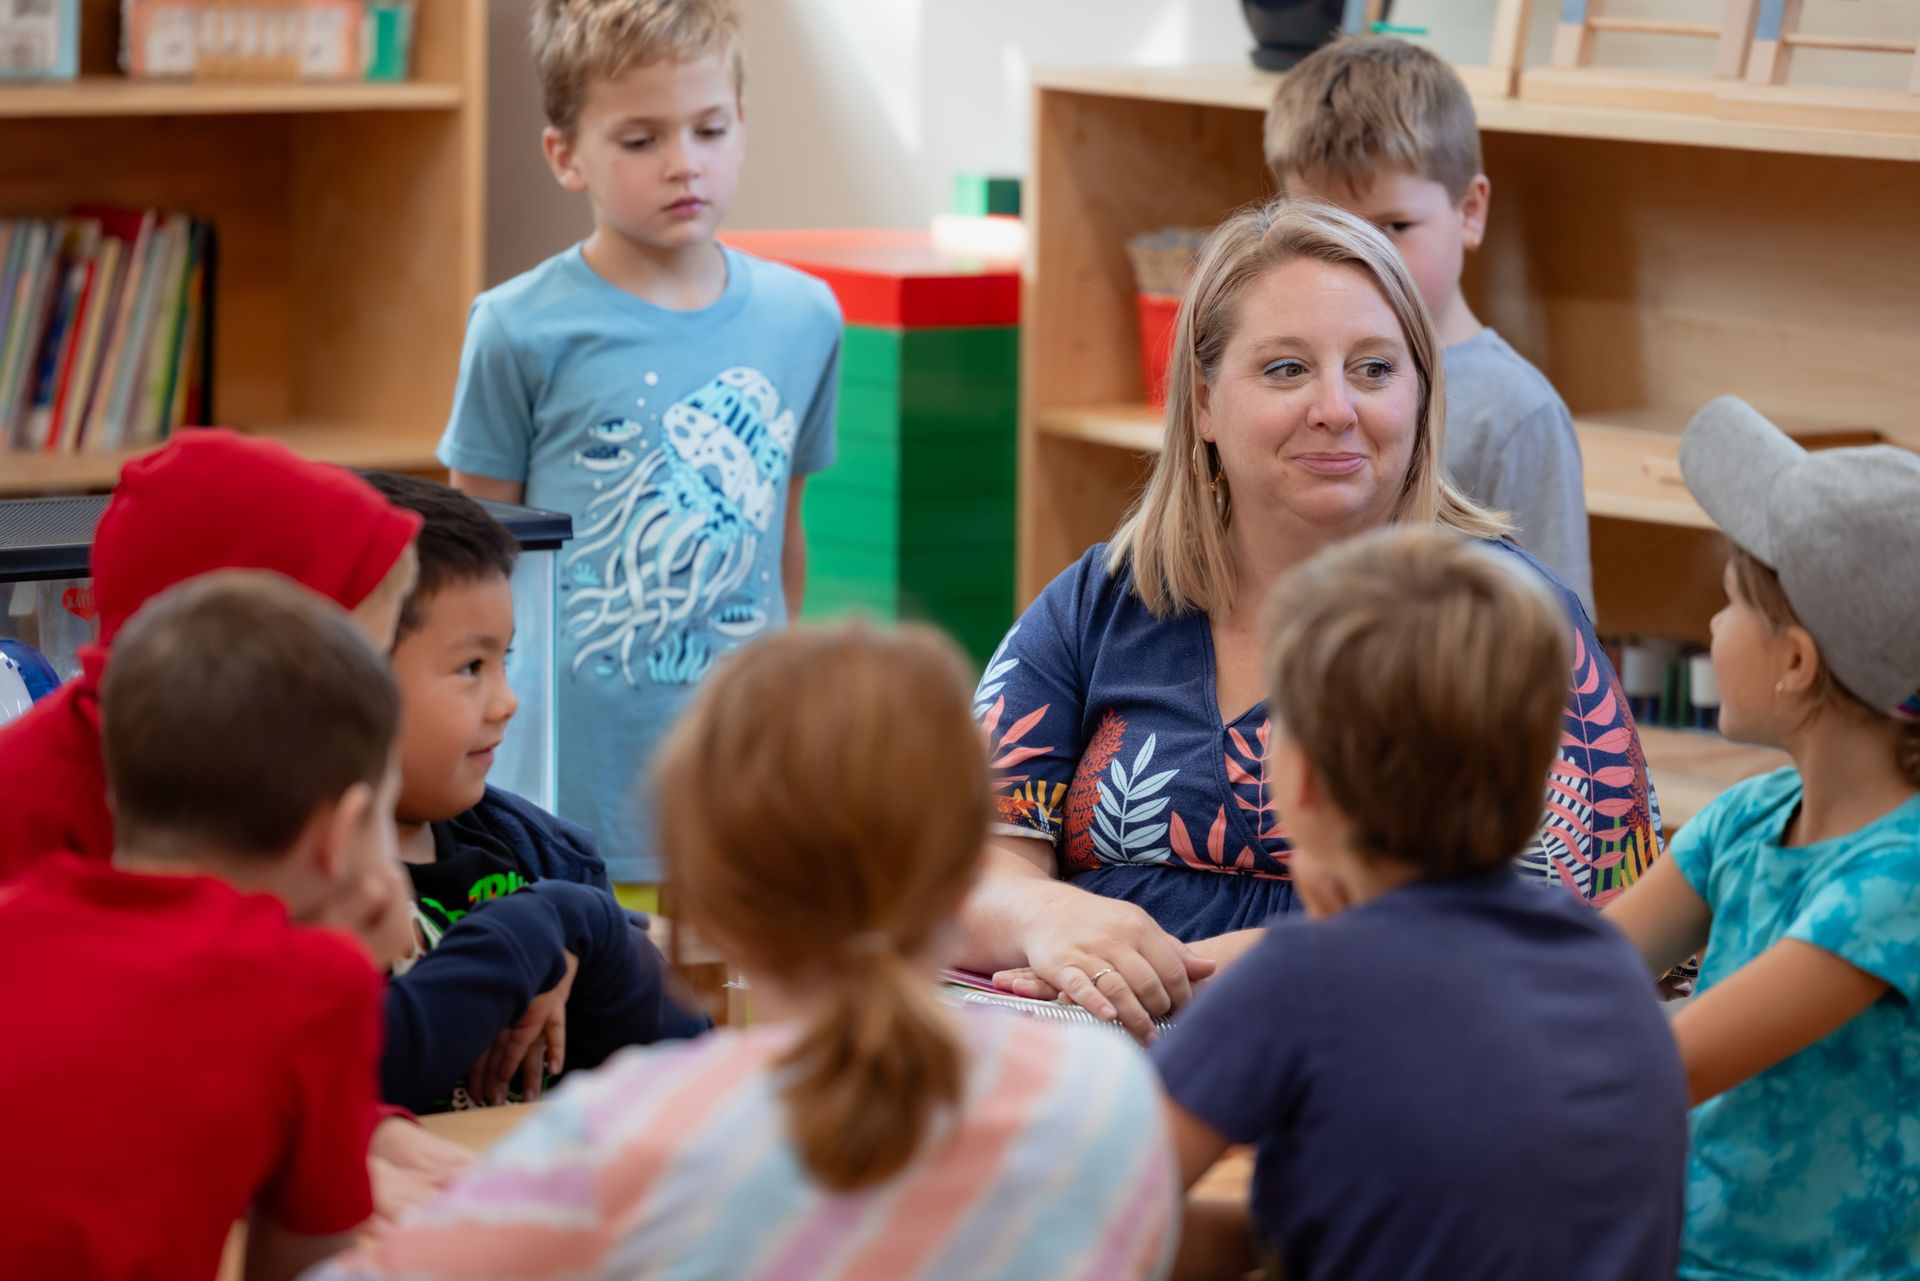 A montessori guide is sitting in a circle with a group of children in a classroom.